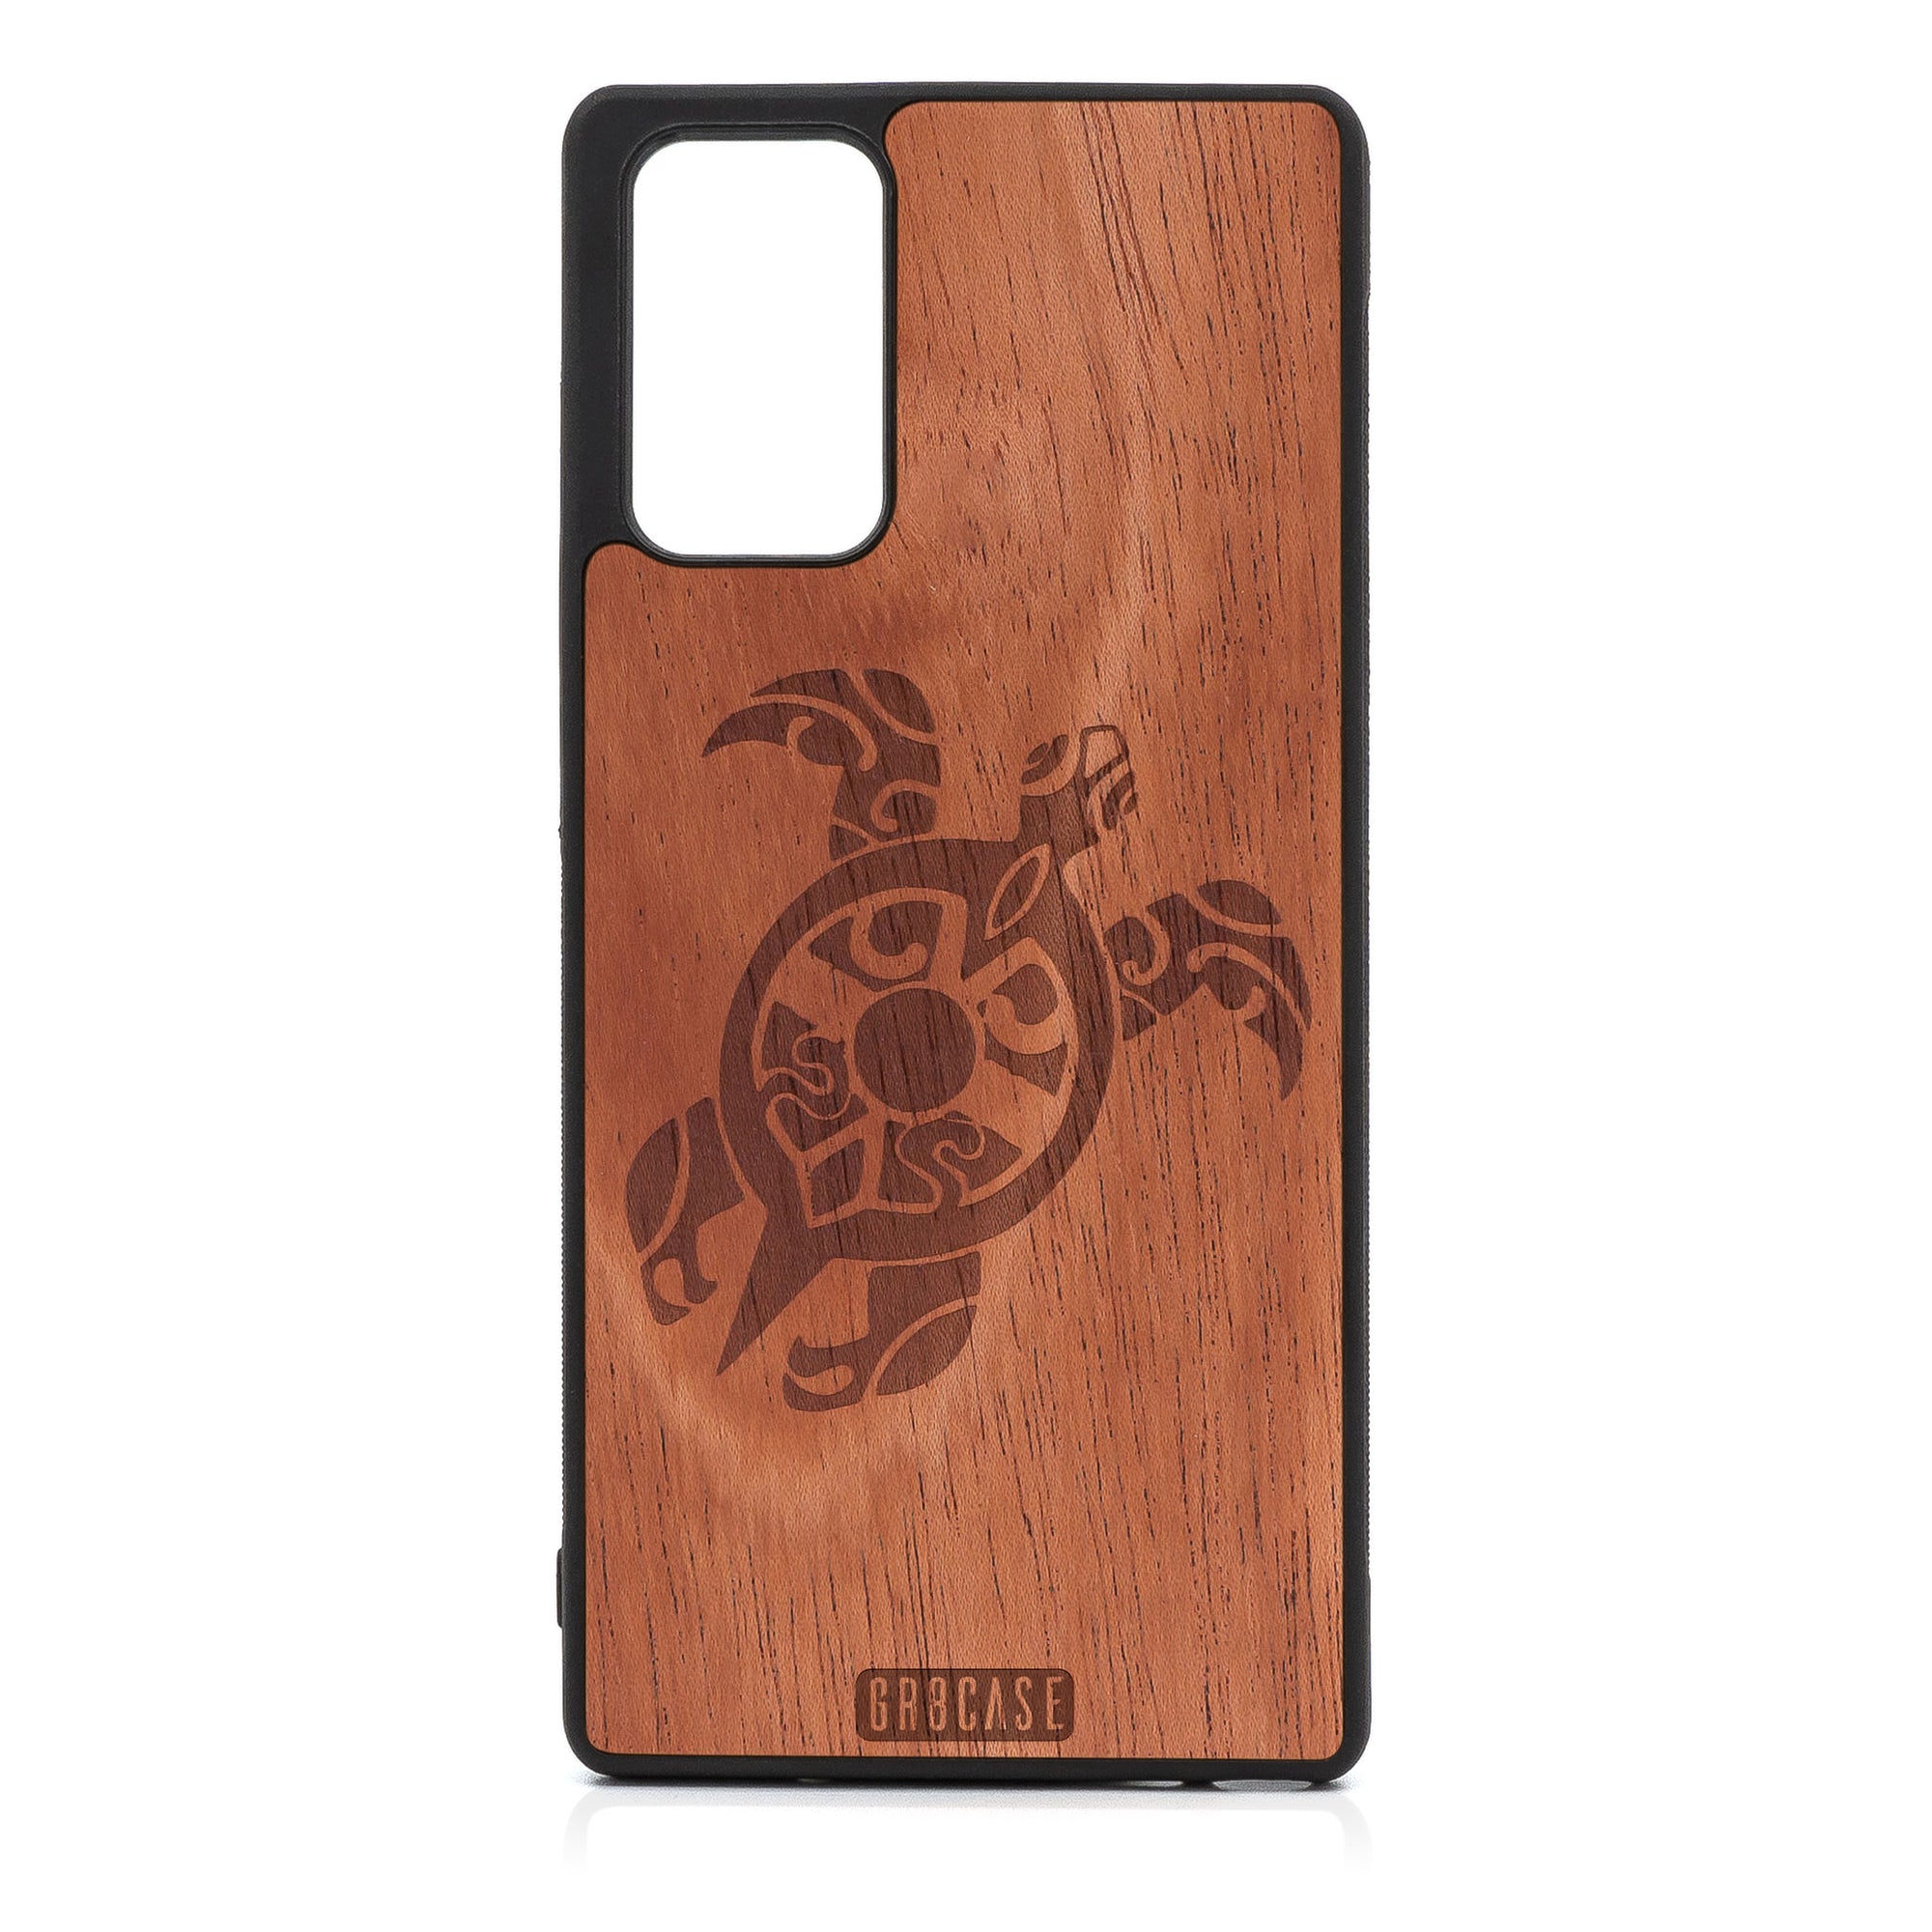 Turtle Design Wood Case For Samsung Galaxy Note 20